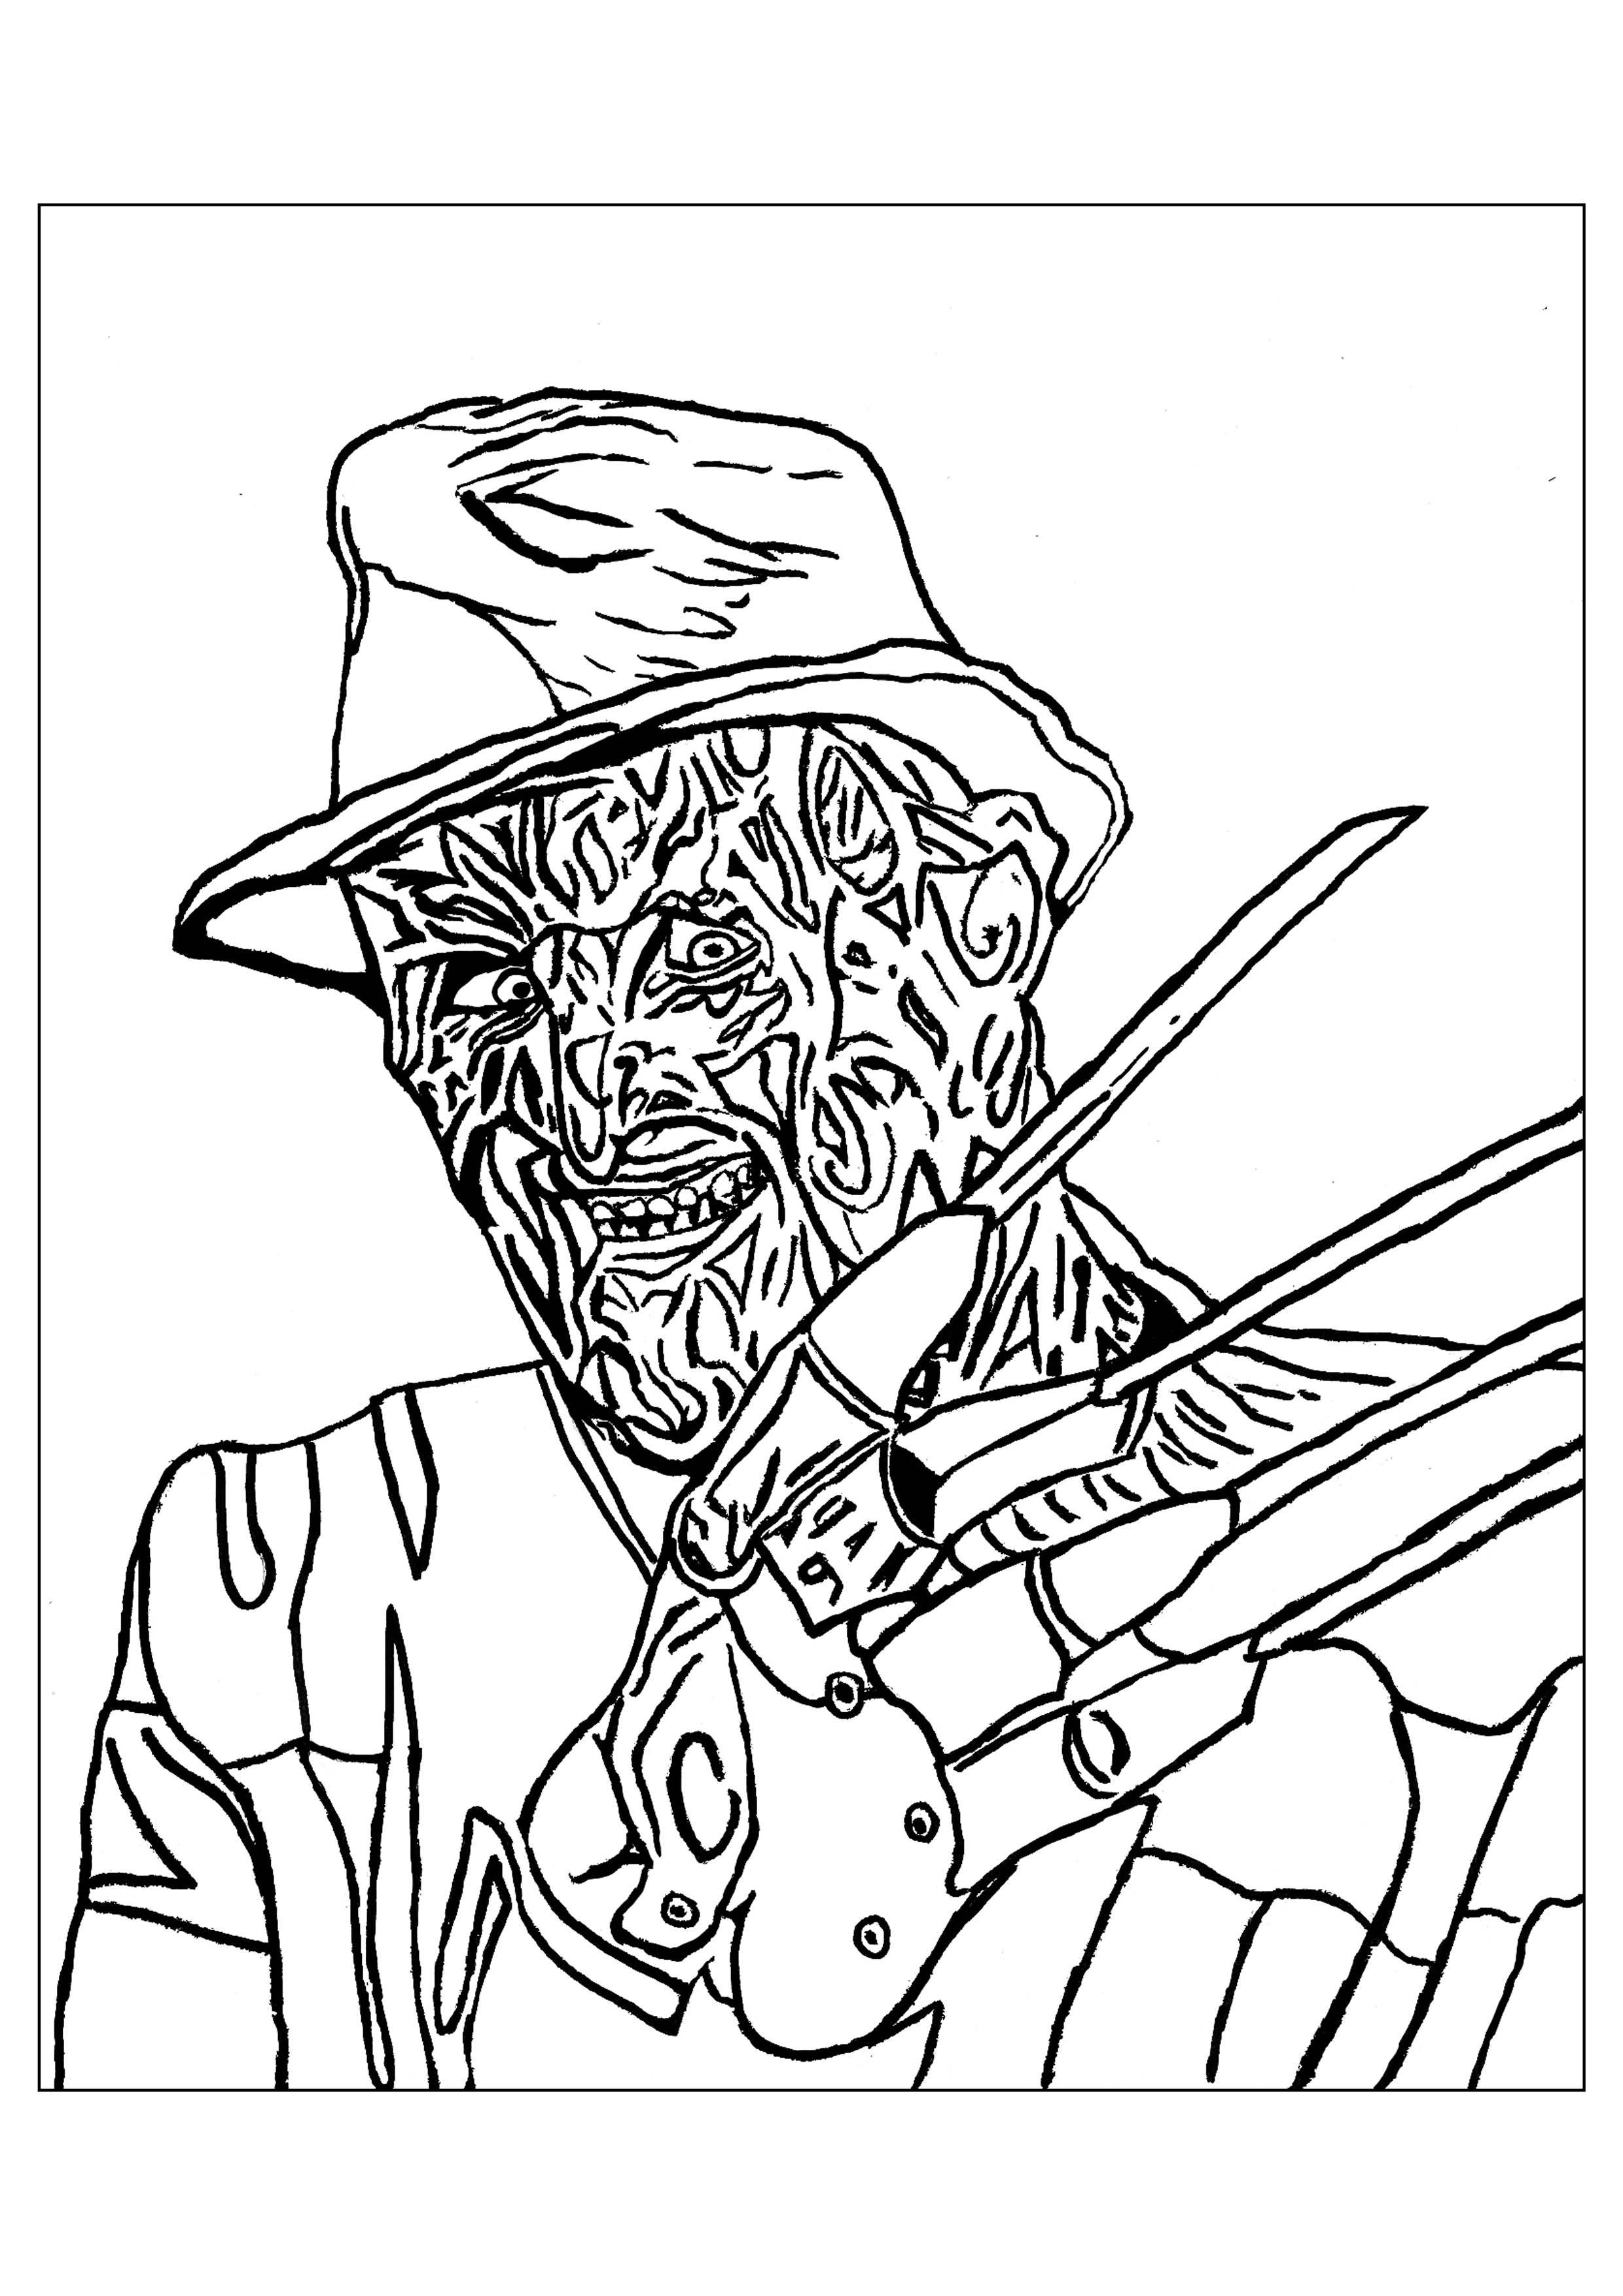 Horror Movie Coloring Pages at GetColorings.com | Free printable